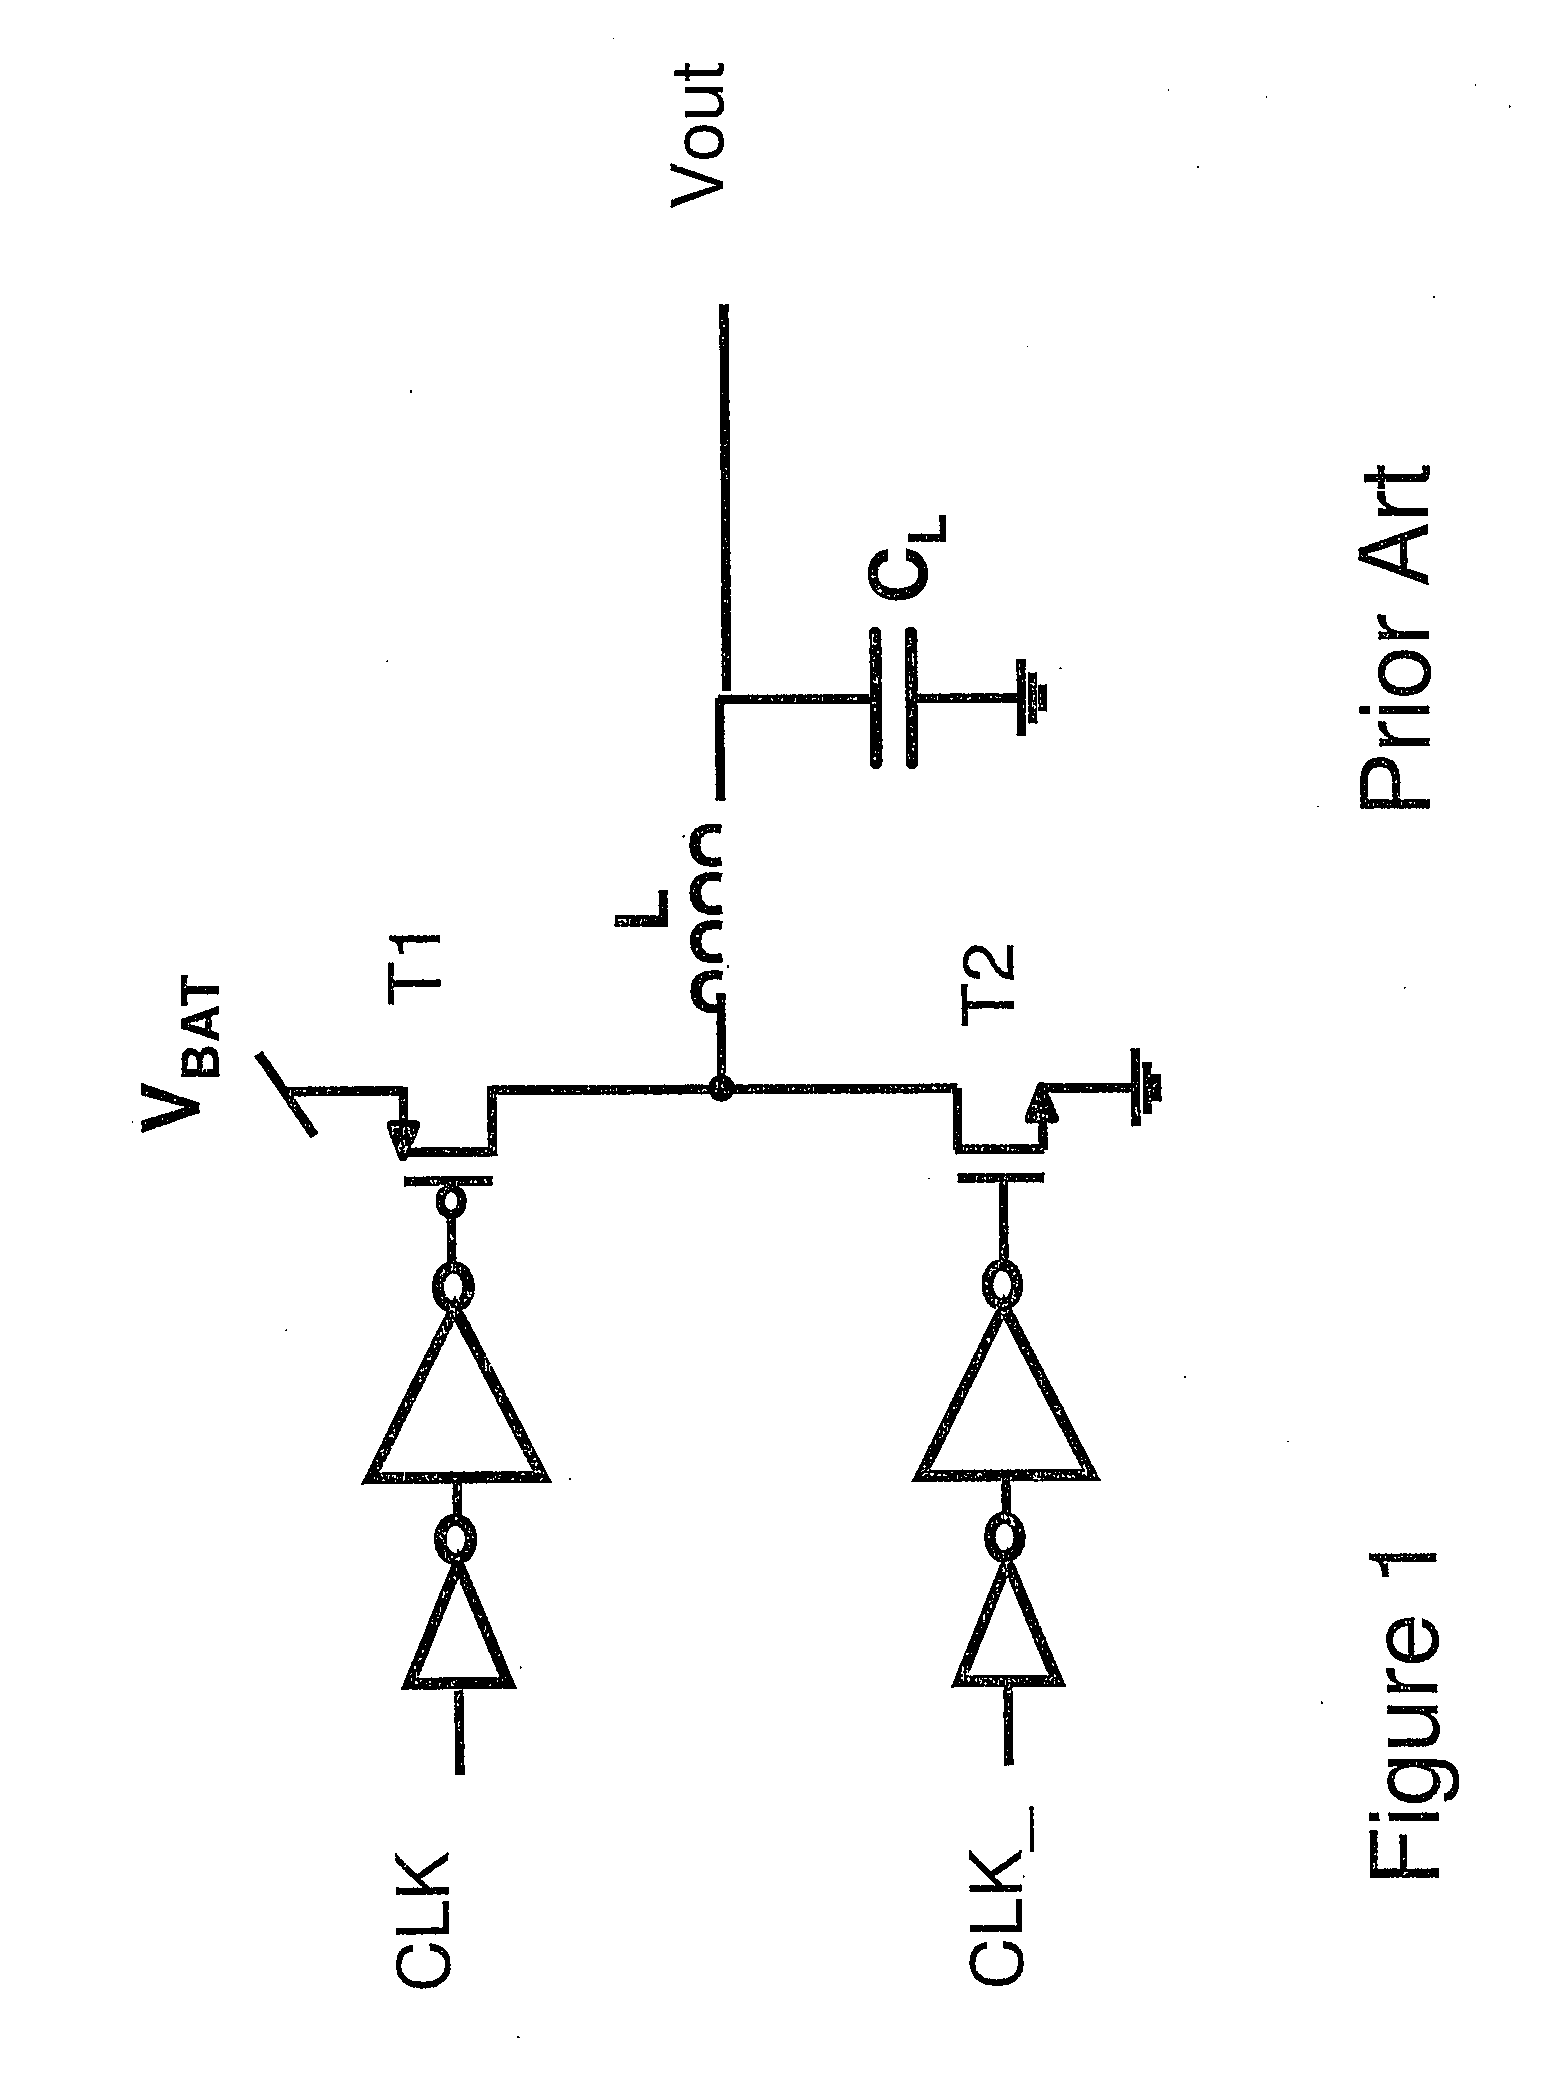 Circuit and Method for a Fully Integrated Switched-Capacitor Step-Down Power Converter